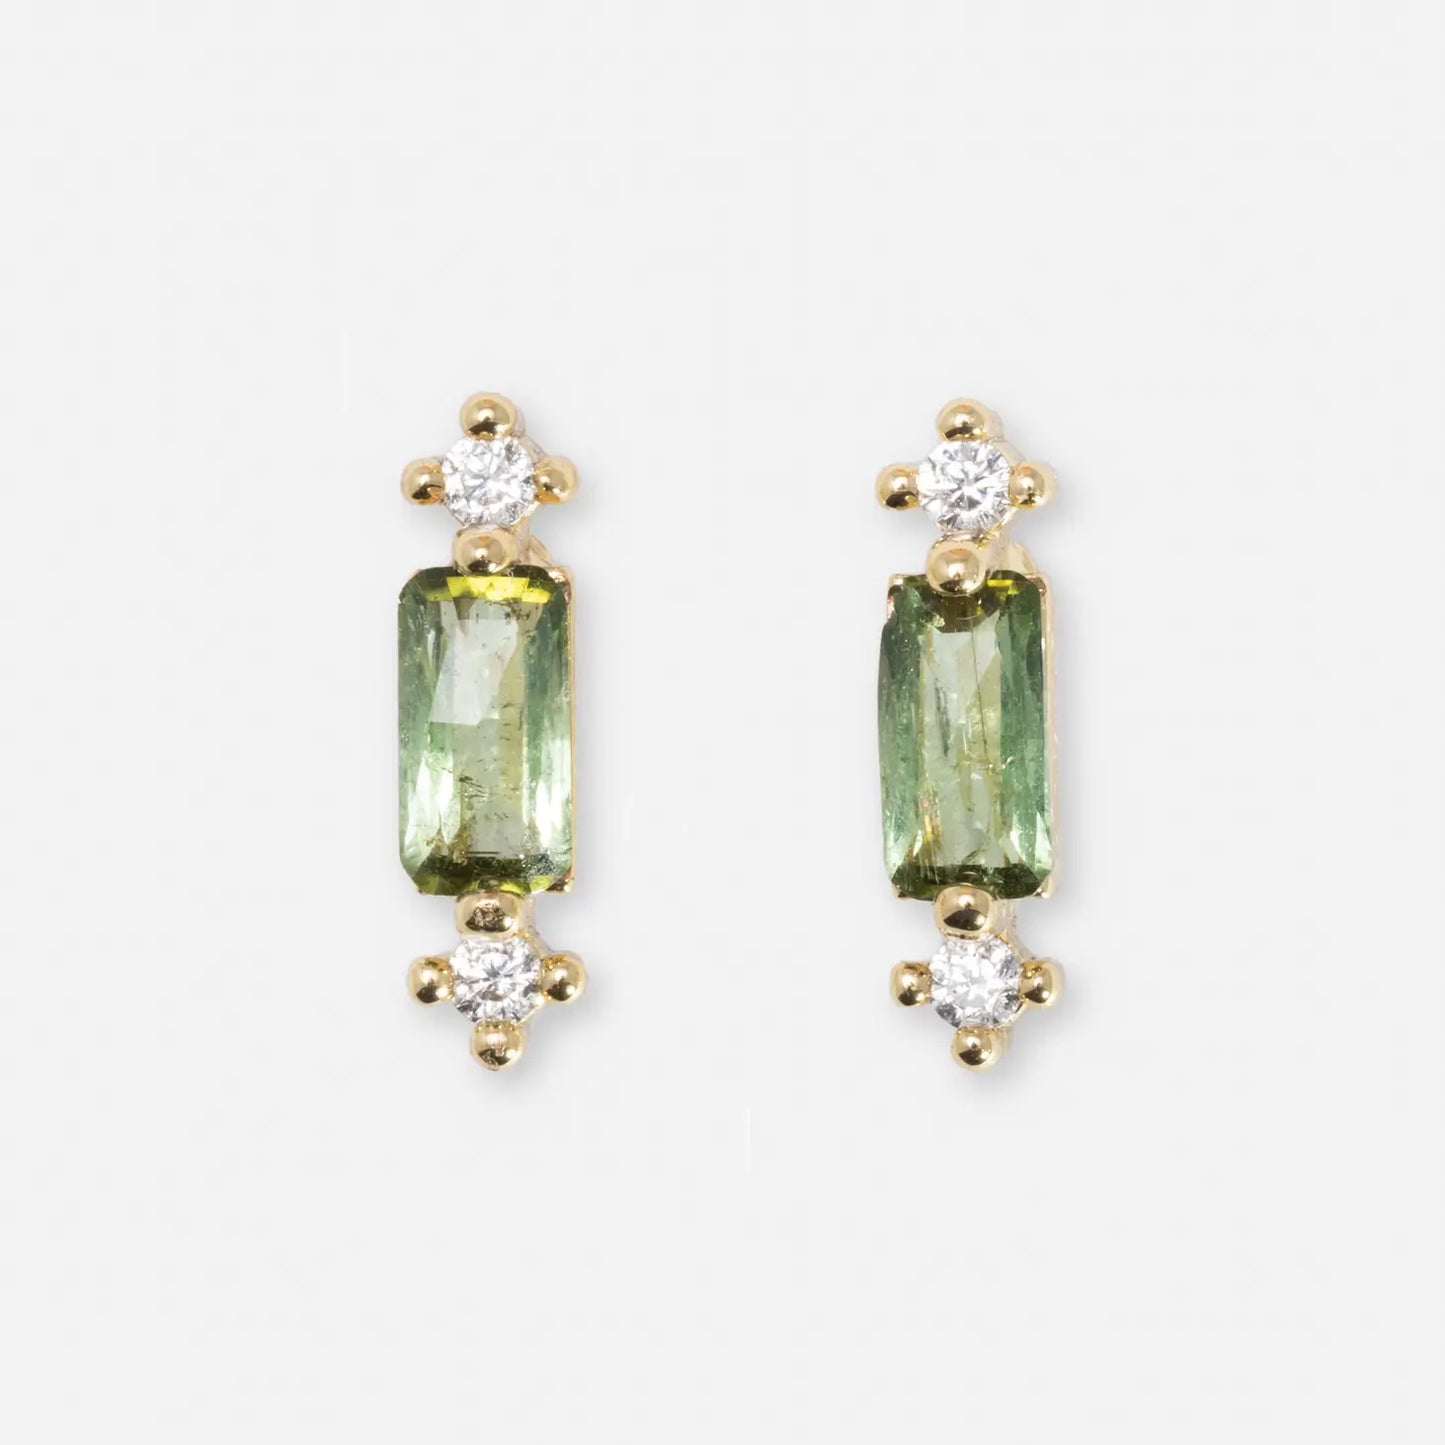 Jane Stud Earrings in Green Tourmaline with CZ Detail, Gold Plated and Stainless Steel.